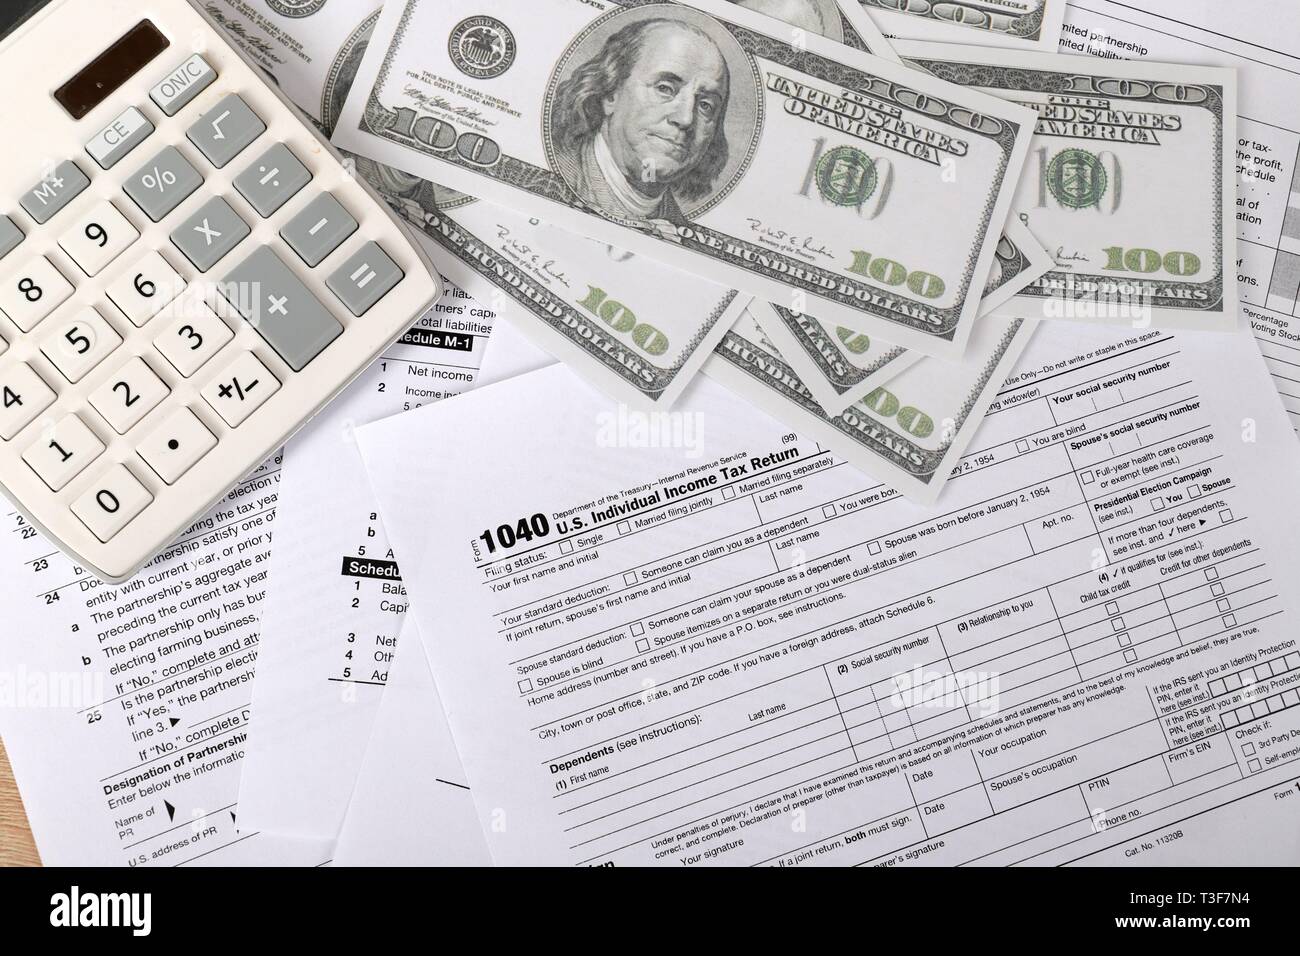 1040 tax form - individual income tax return form 1040 lies near hundred dollar bills and calculator on a Table Stock Photo